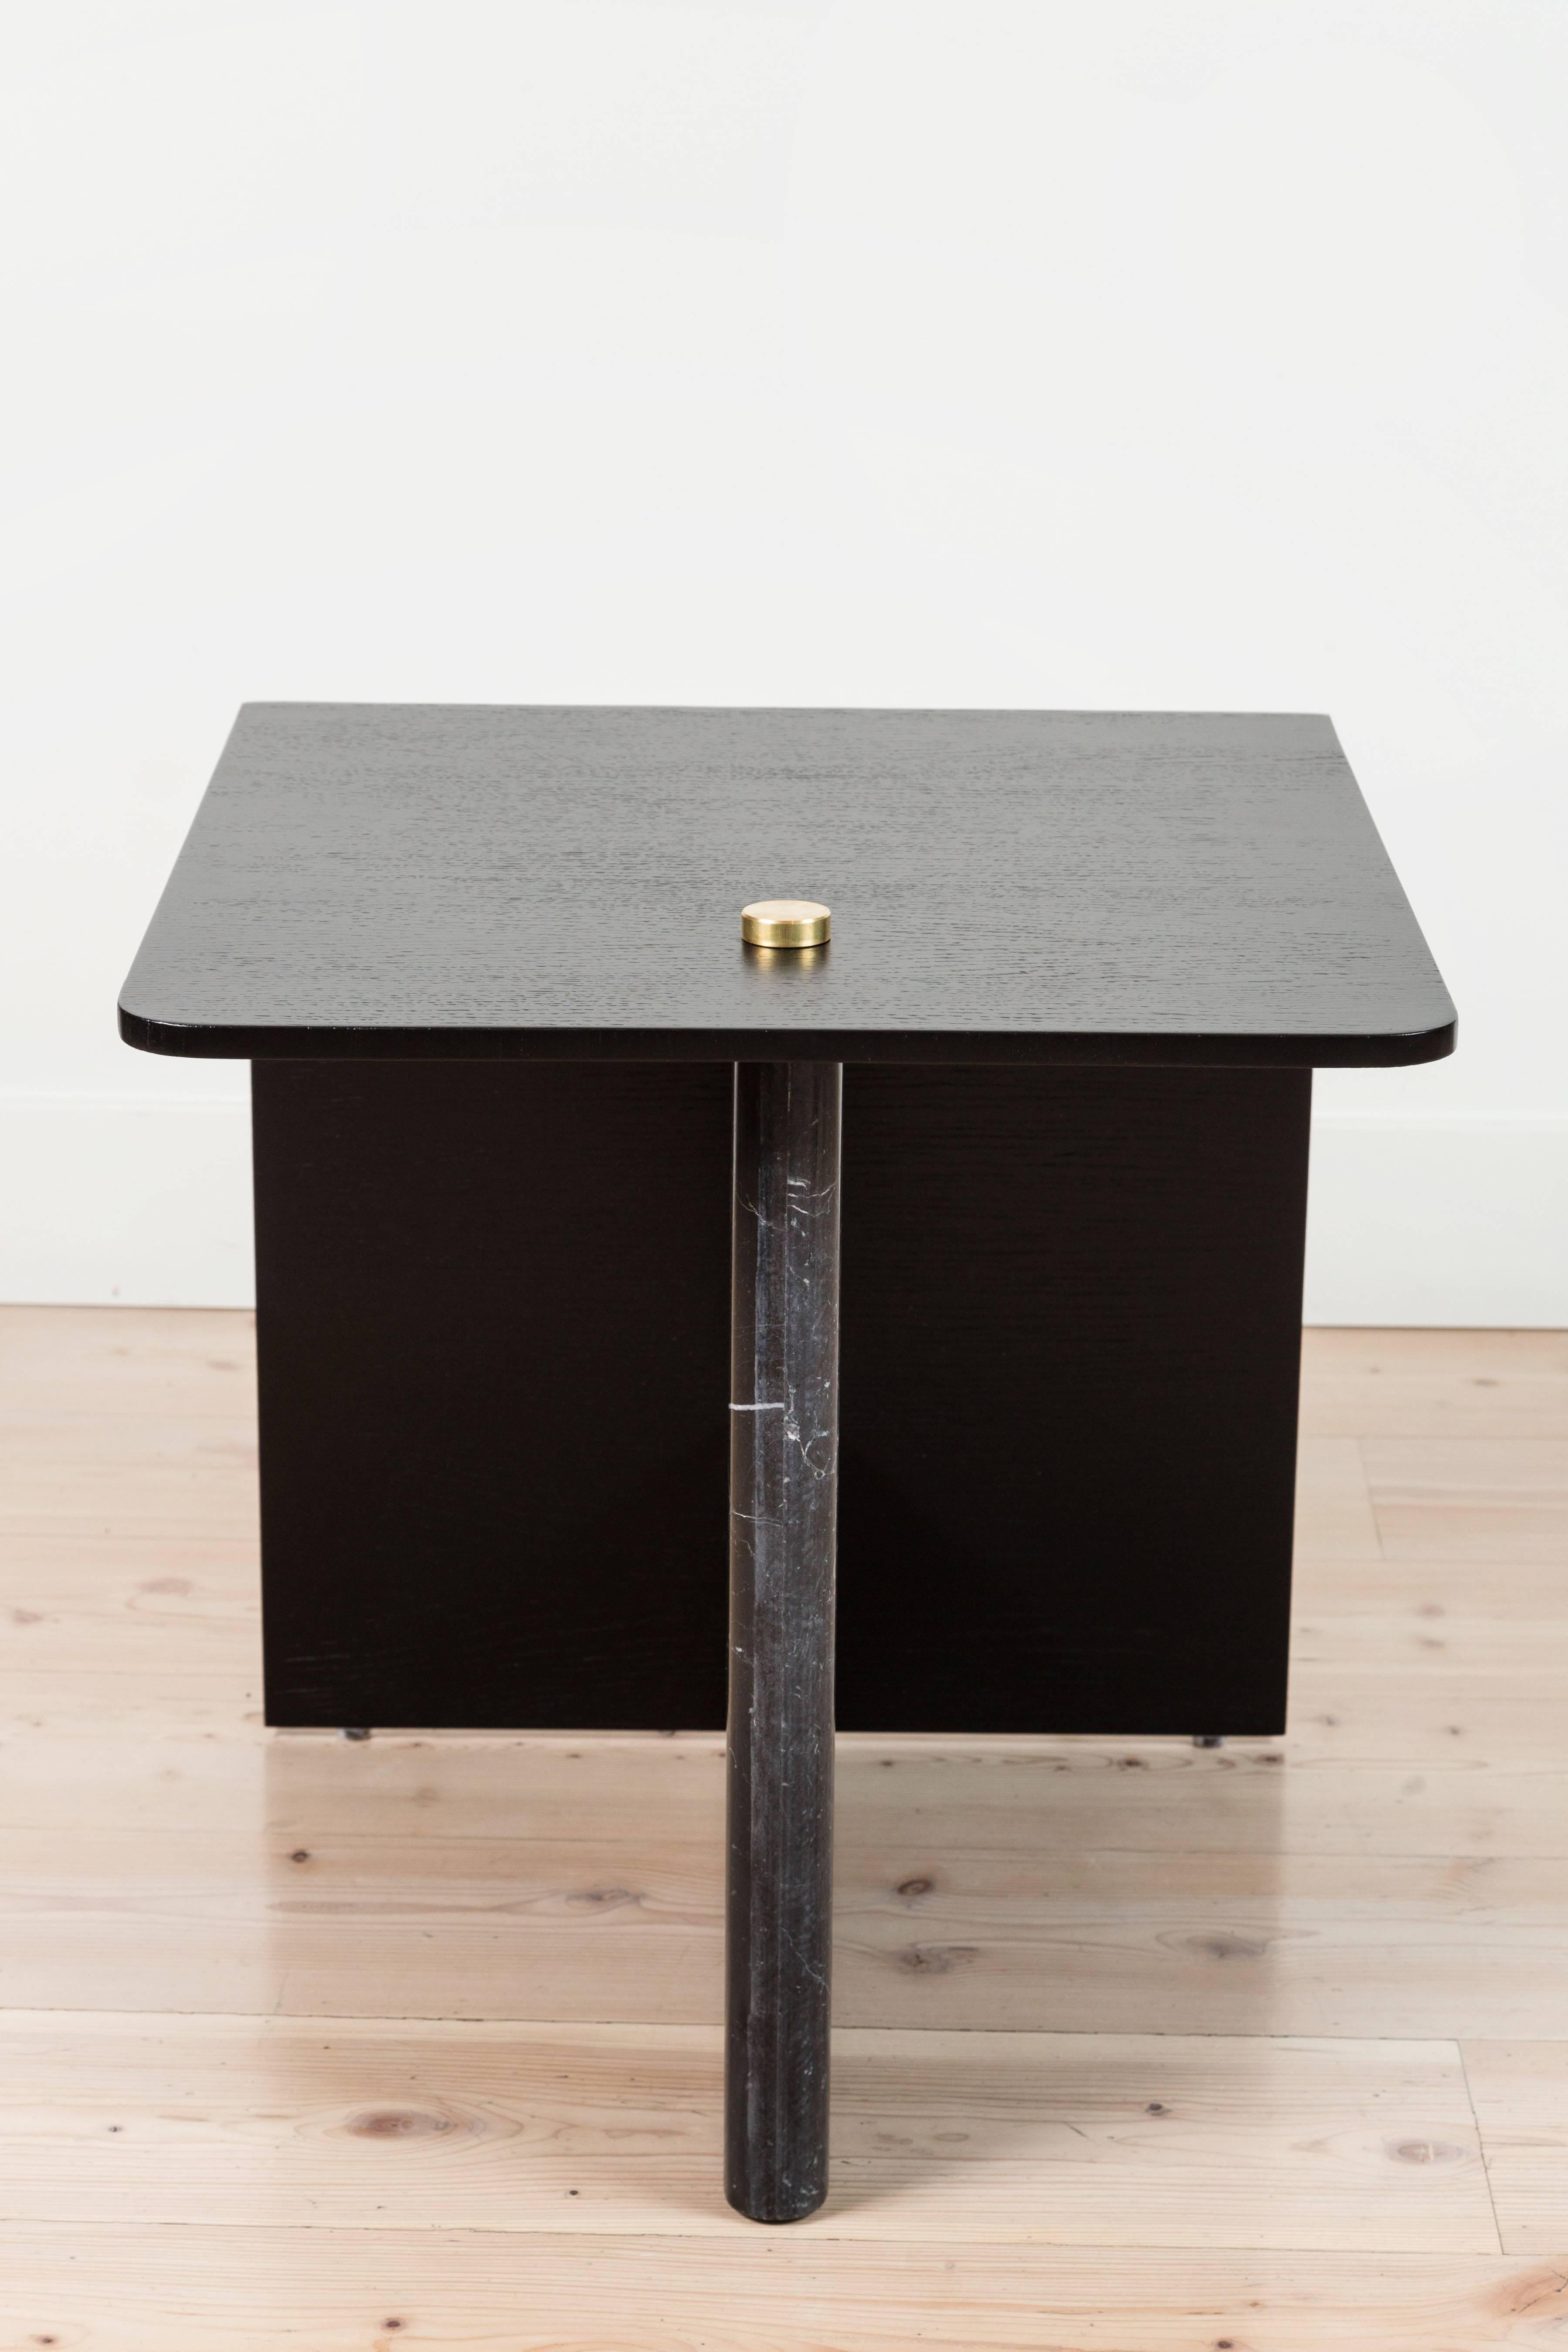 The Huxley Side Table features a waterfall oak or walnut top, a stepped stone base and brass details. Shown here in Ebonized Oak and Negra Marquina Marble. 

The Lawson-Fenning Collection is designed and handmade in Los Angeles, California.

Can be